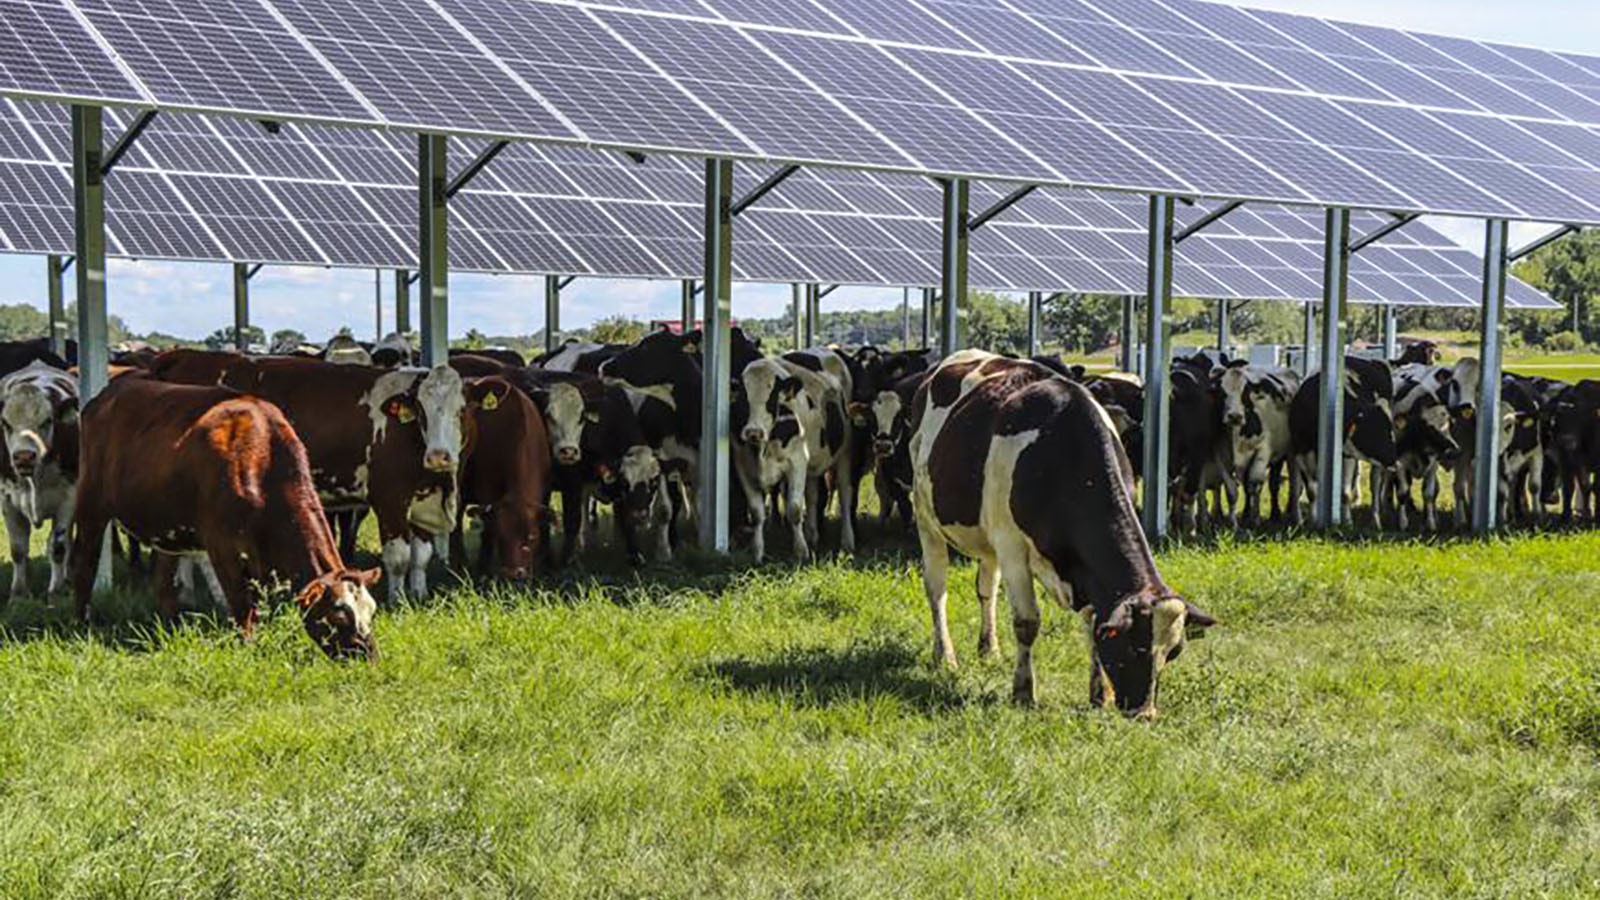 A herd of cows graze under raised solar panels at a University of Minnesota test ranch.